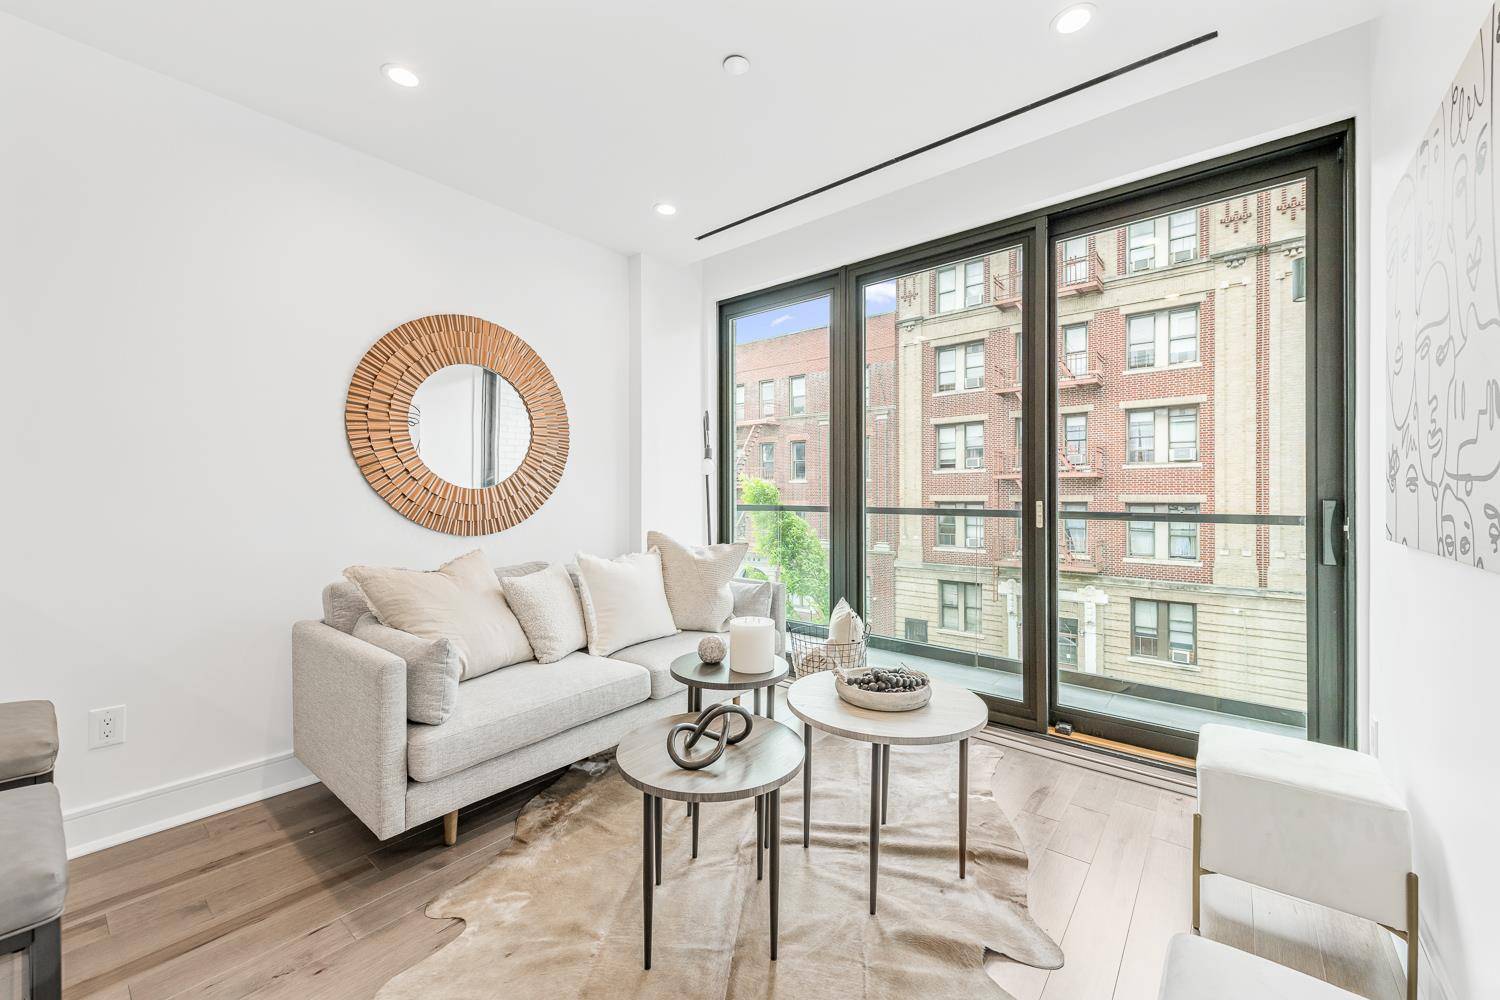 Luxury 1 2 Bedroom Condominiums in AstoriaPrecisely designed, with just seven units, the striking four story structure immediately commands attention with a cream colored brick exterior that s contrasted with ...